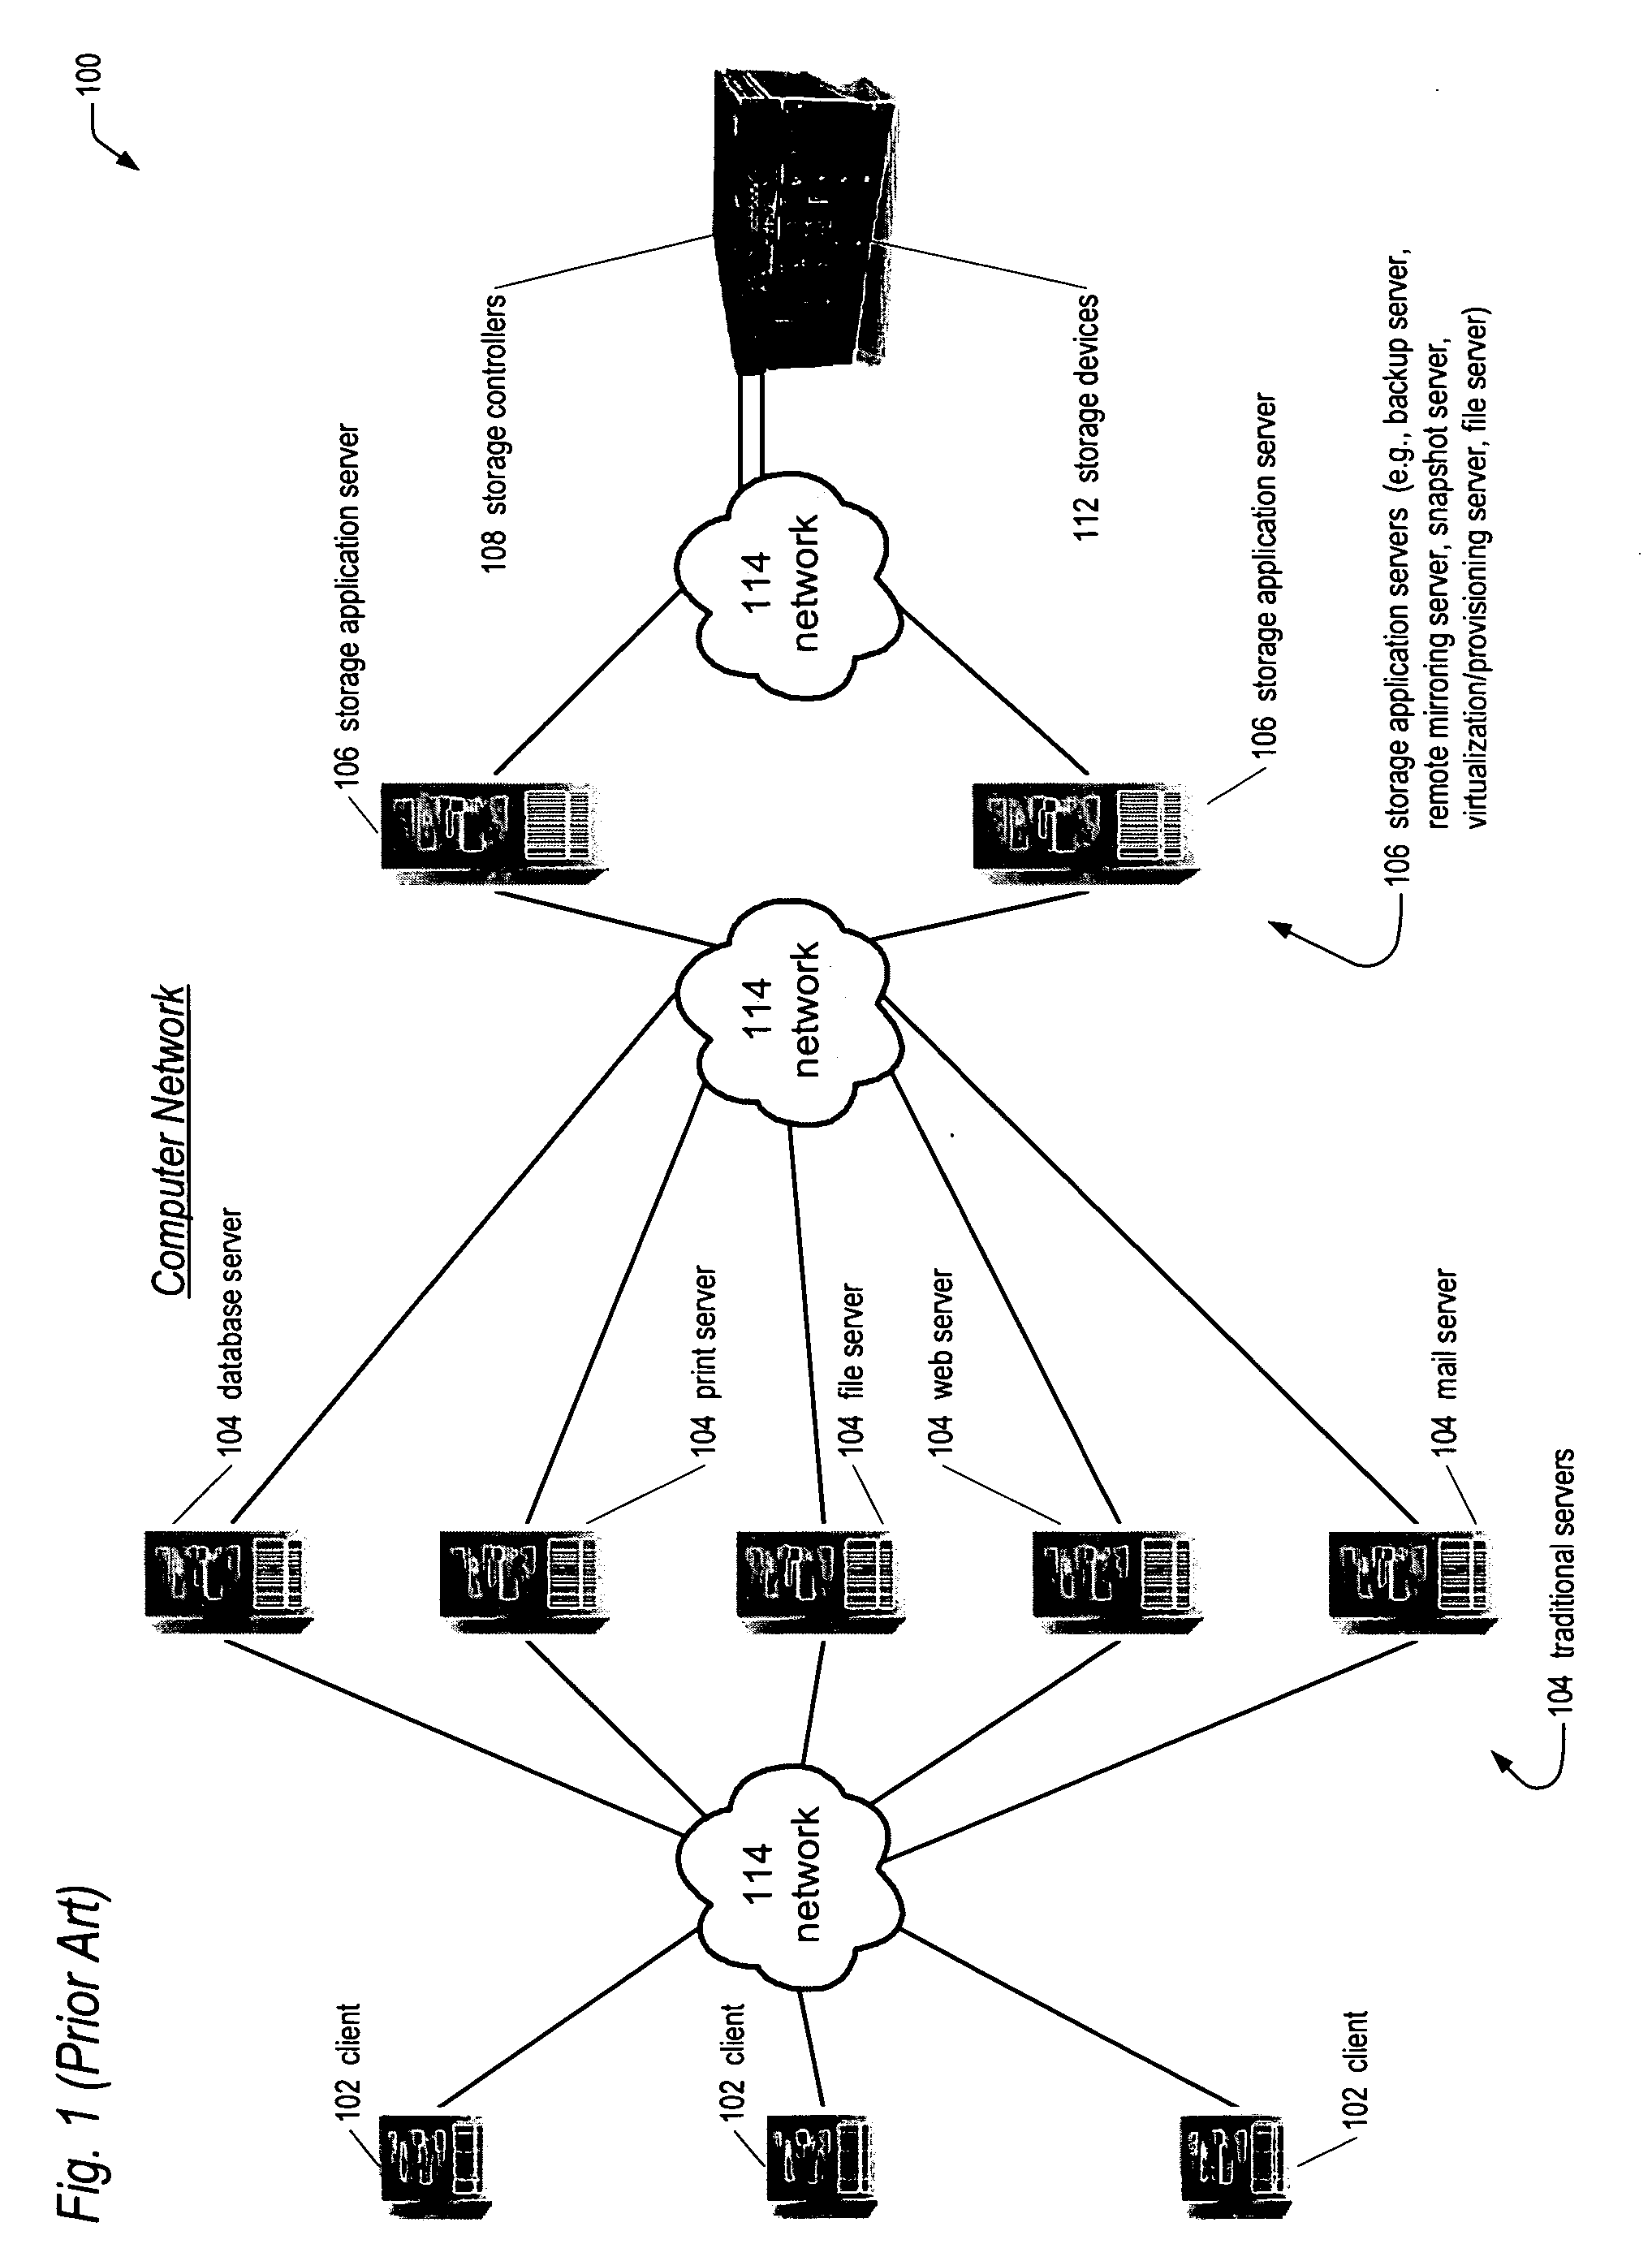 Network storage appliance with integrated server and redundant storage controllers